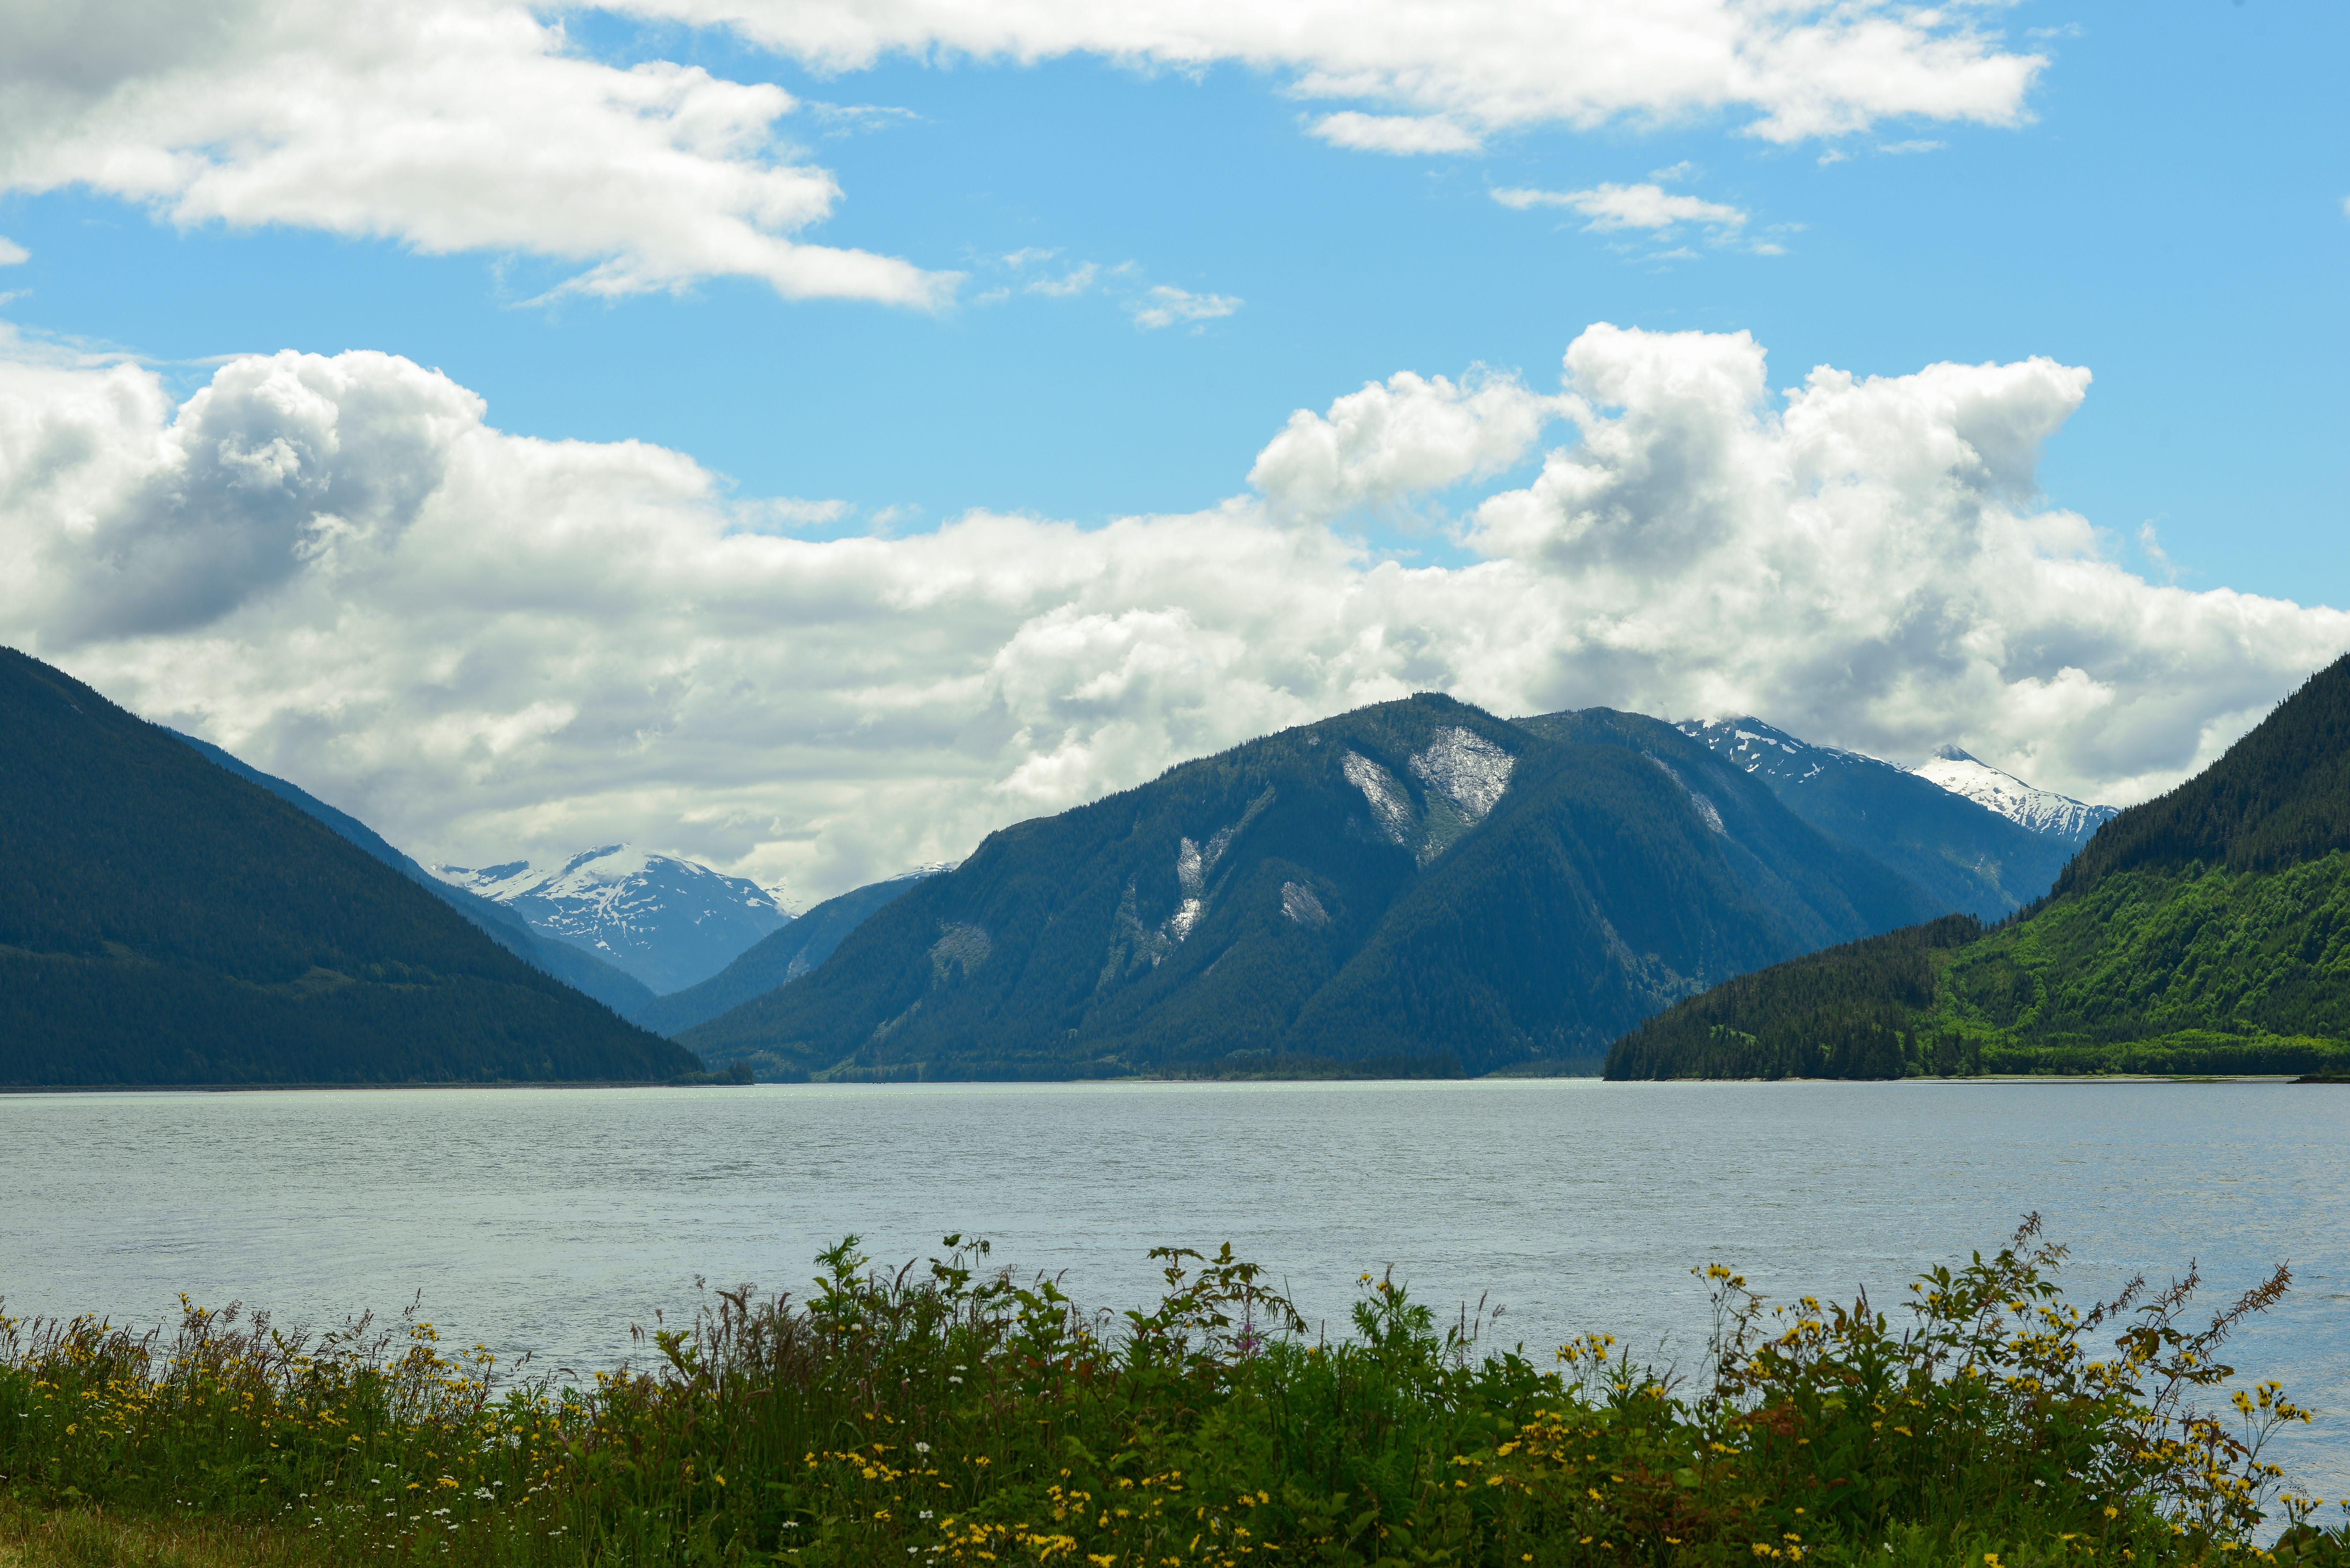 The Skeena river with mountains in the background in British Columbia, Canada.